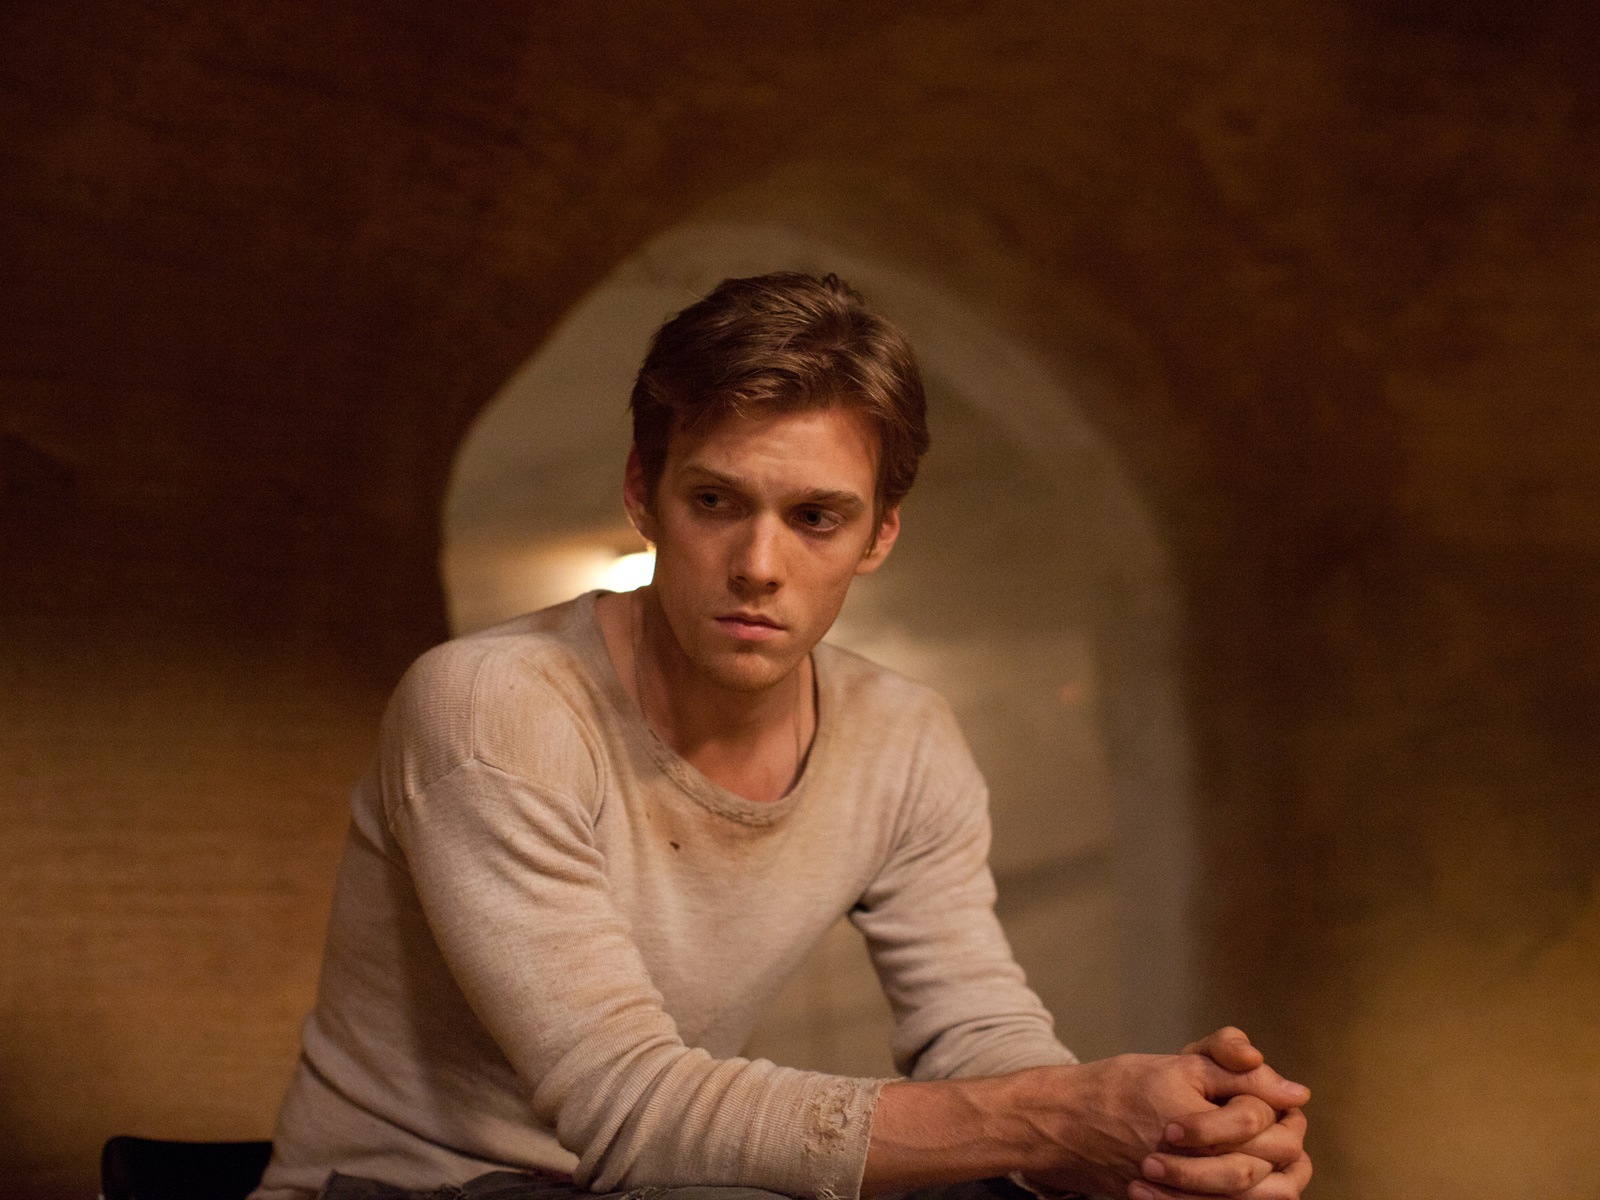 The Host 2013 movie HD wallpapers #7 - 1600x1200